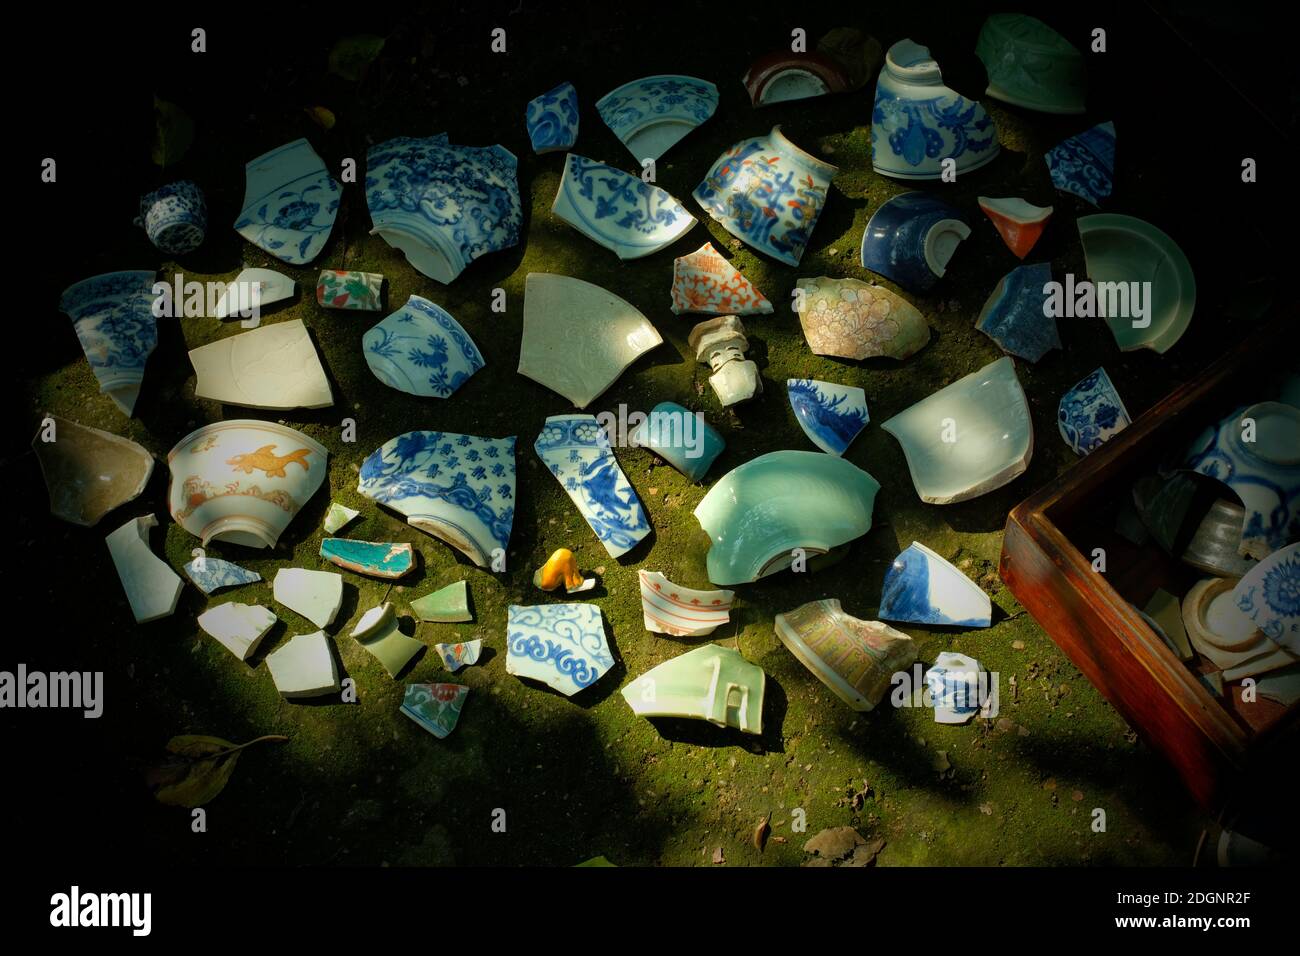 https://c8.alamy.com/comp/2DGNR2F/personal-collection-of-ancient-chinese-ceramic-shards-from-the-construction-sites-in-beijing-china-mainly-that-of-the-ming-and-qing-dynasty-2DGNR2F.jpg